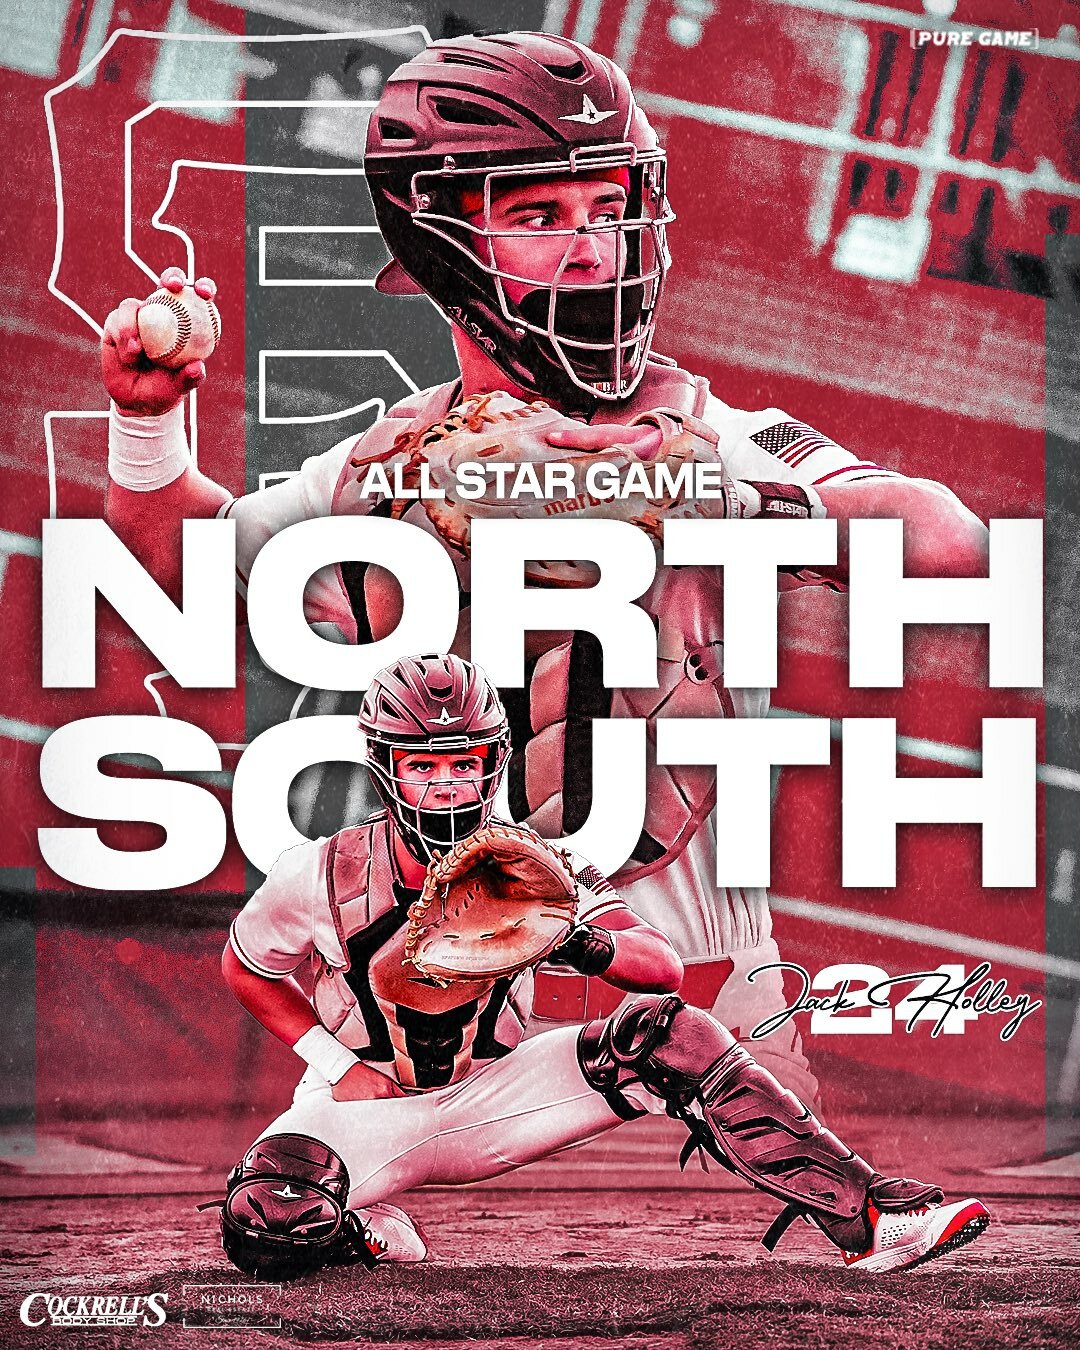 Spanish Fort junior and Georgia State commit Jack Holley, fresh off a run to the Class 6A state finals, was named to the AHSAA North-South All-Star roster ahead of this summer’s competition in Montgomery.